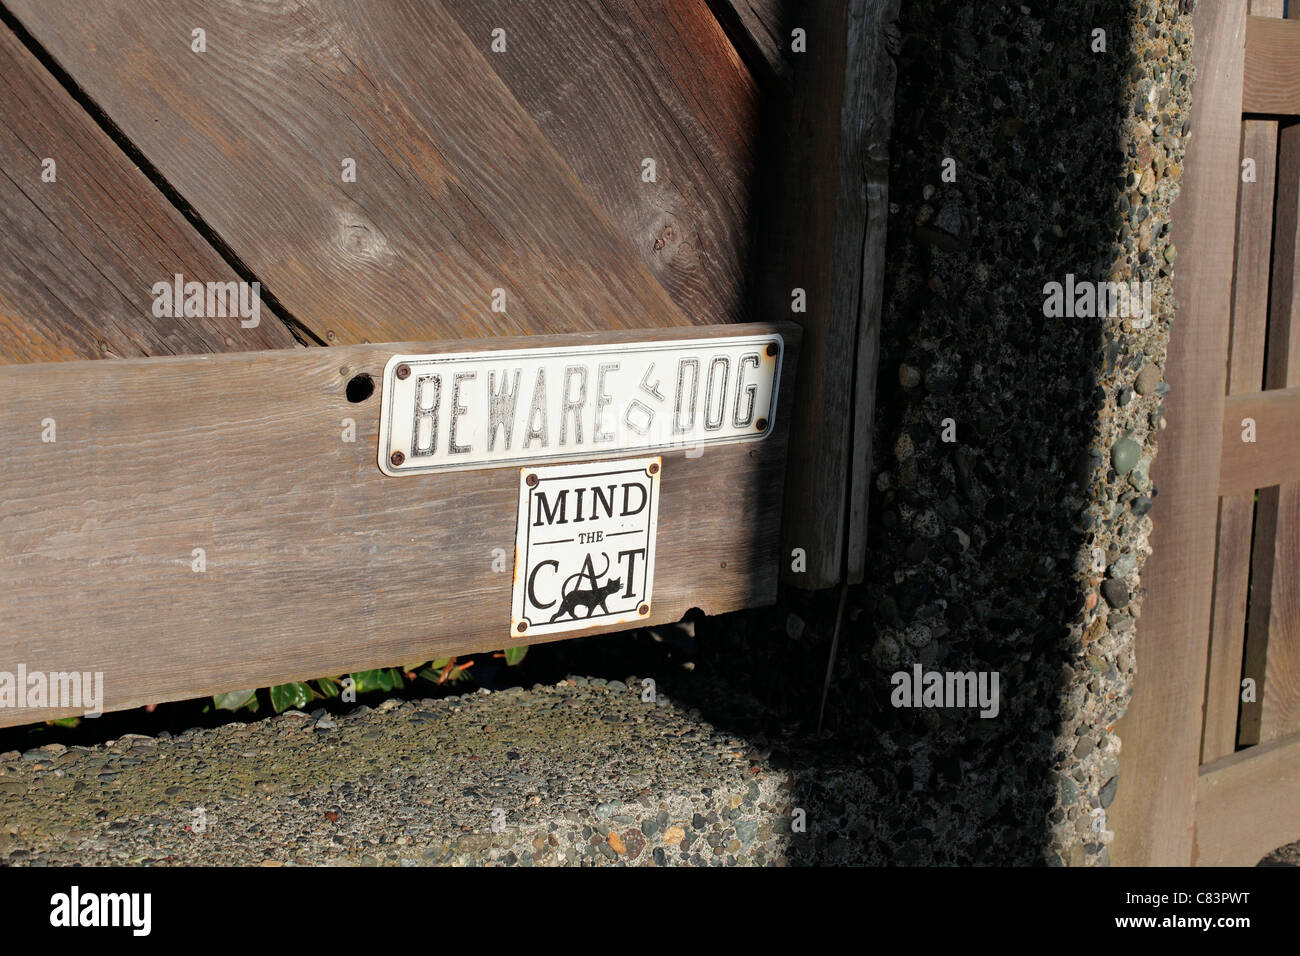 Beware of dog and mind the cat sign on a wooden fence Stock Photo